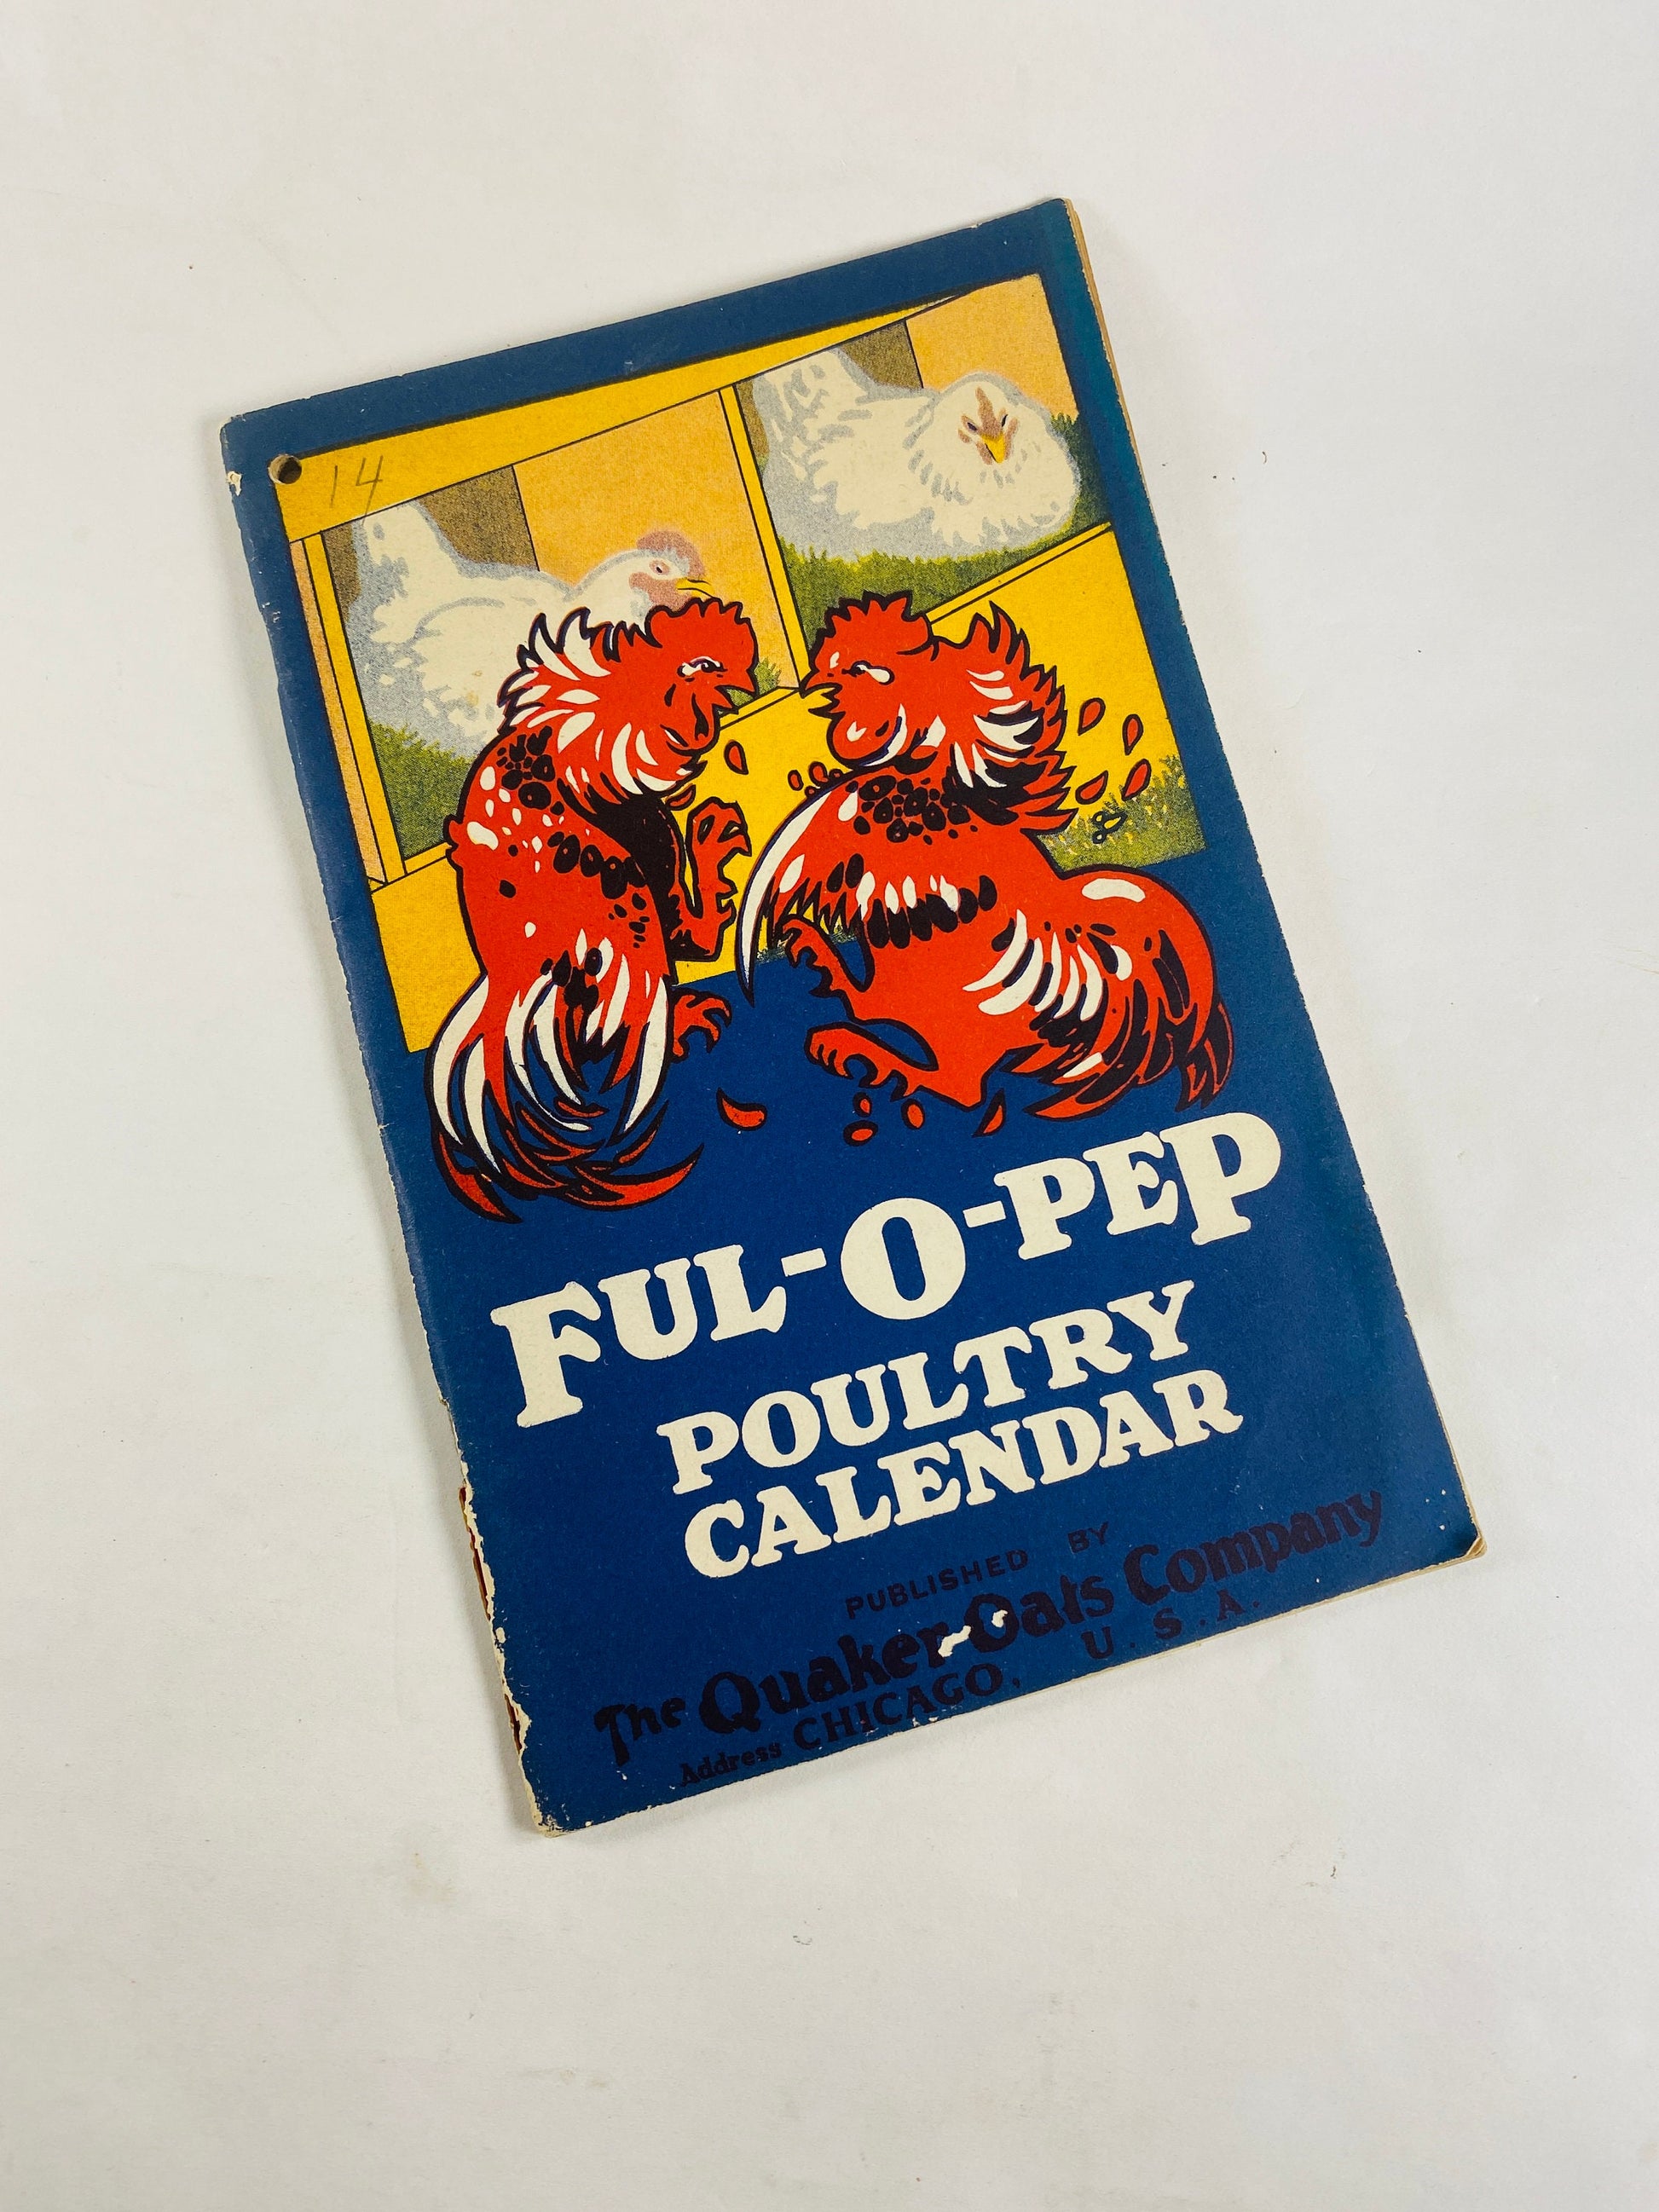 Quaker Oats poultry calendar vintage advertising booklet circa 1950 ORIGINAL collectible blue retro kitchen home decor Chicken Rooster gift